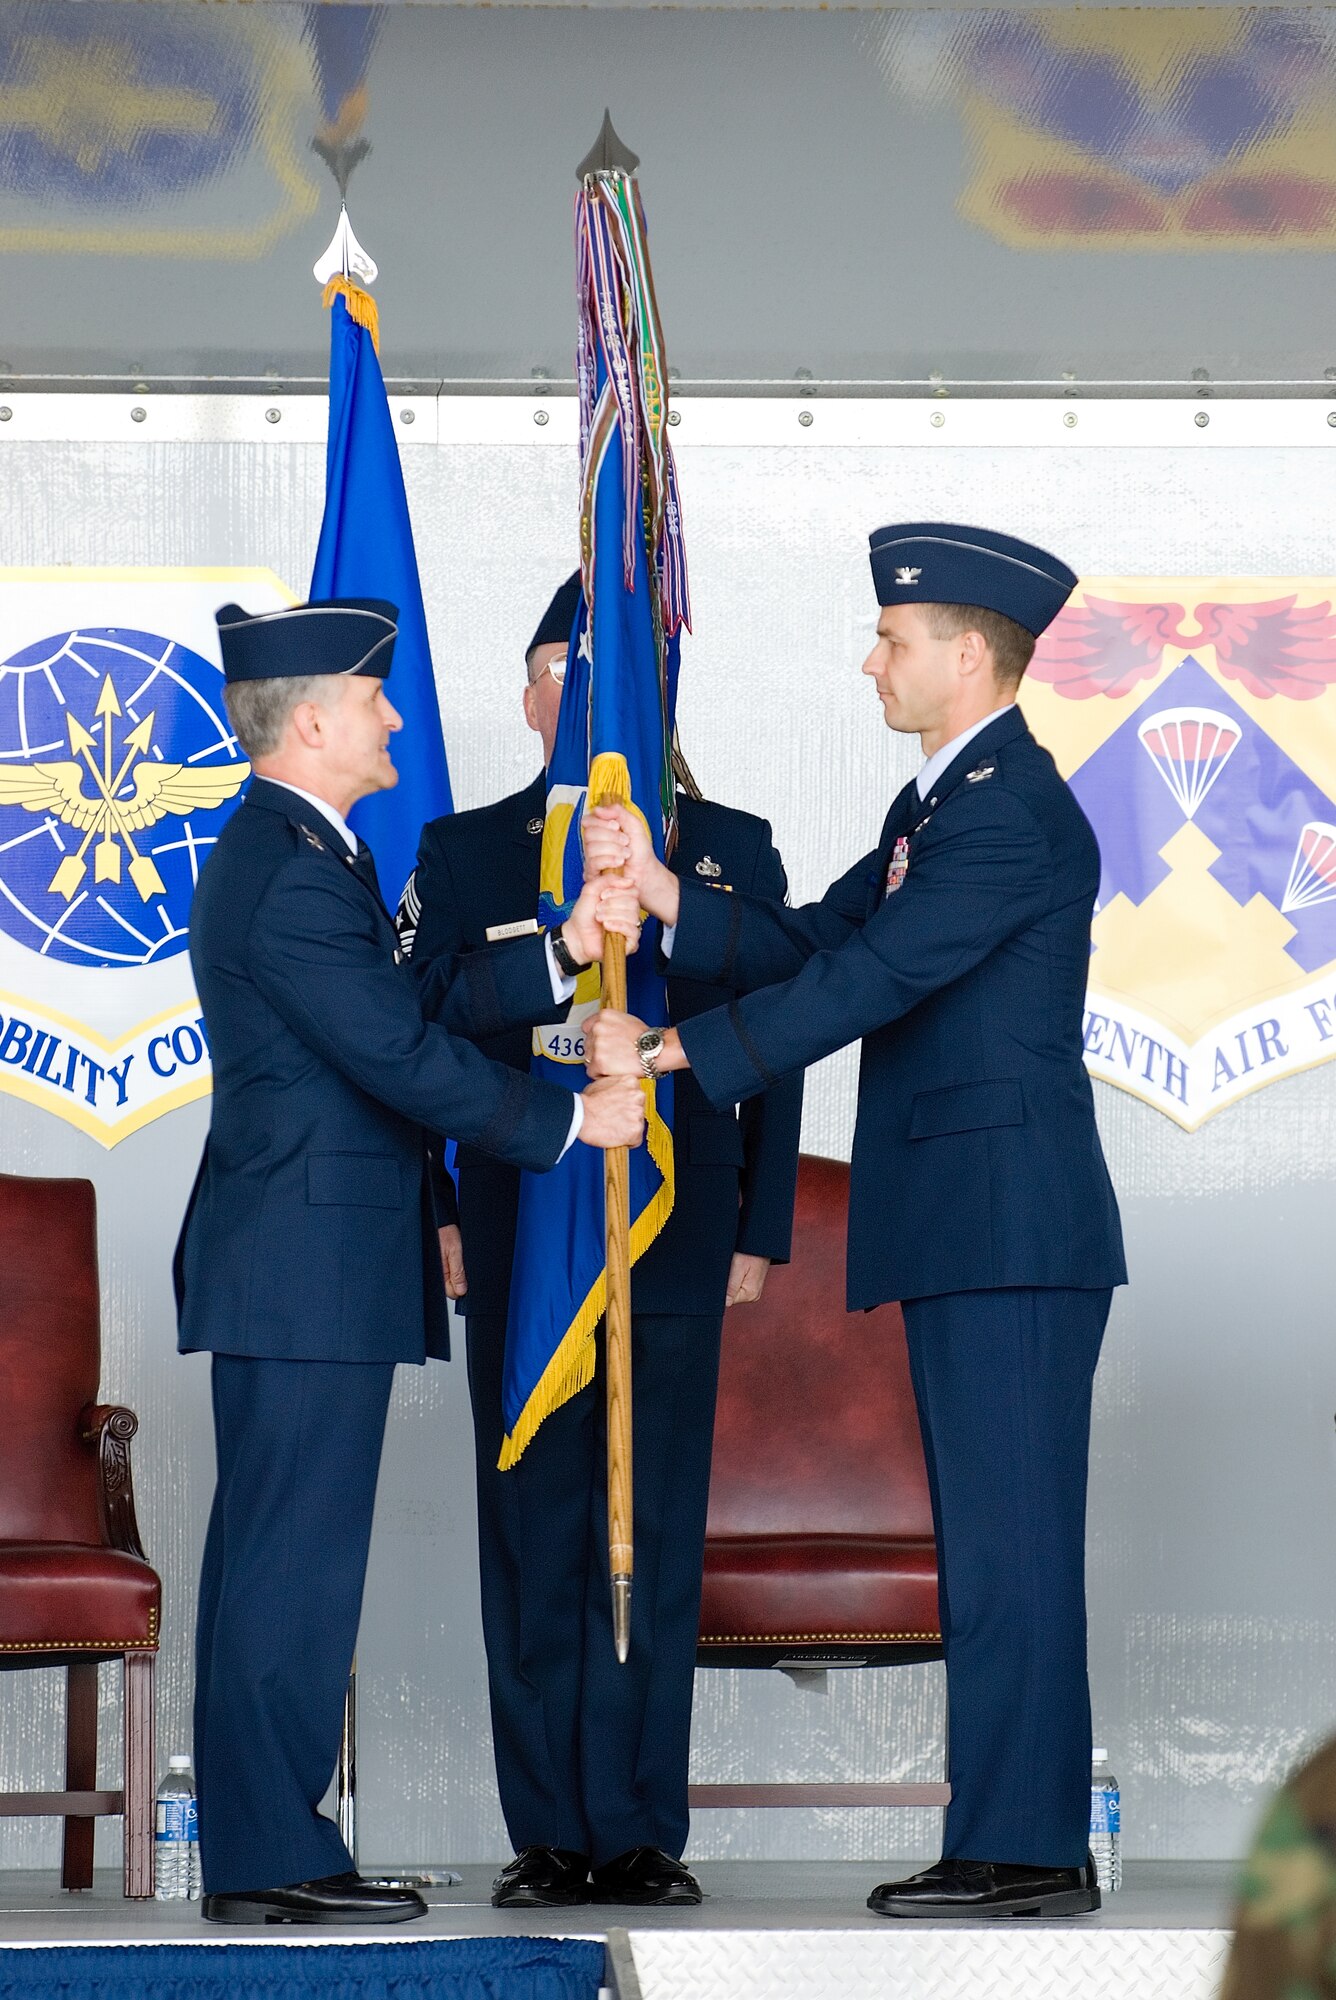 Col. Steven Harrison, 436th Wing commander, accepts the 436th AW guidon from Maj. Gen. James Hawkins, 18th Air Force commander, during a change-of-command ceremony May 8. Colonel Harrison assumed command from Col. Sam Cox, who will be filling a position at the Pentagon, Washington D.C. (U.S. Air Force Photo/Roland Balik)